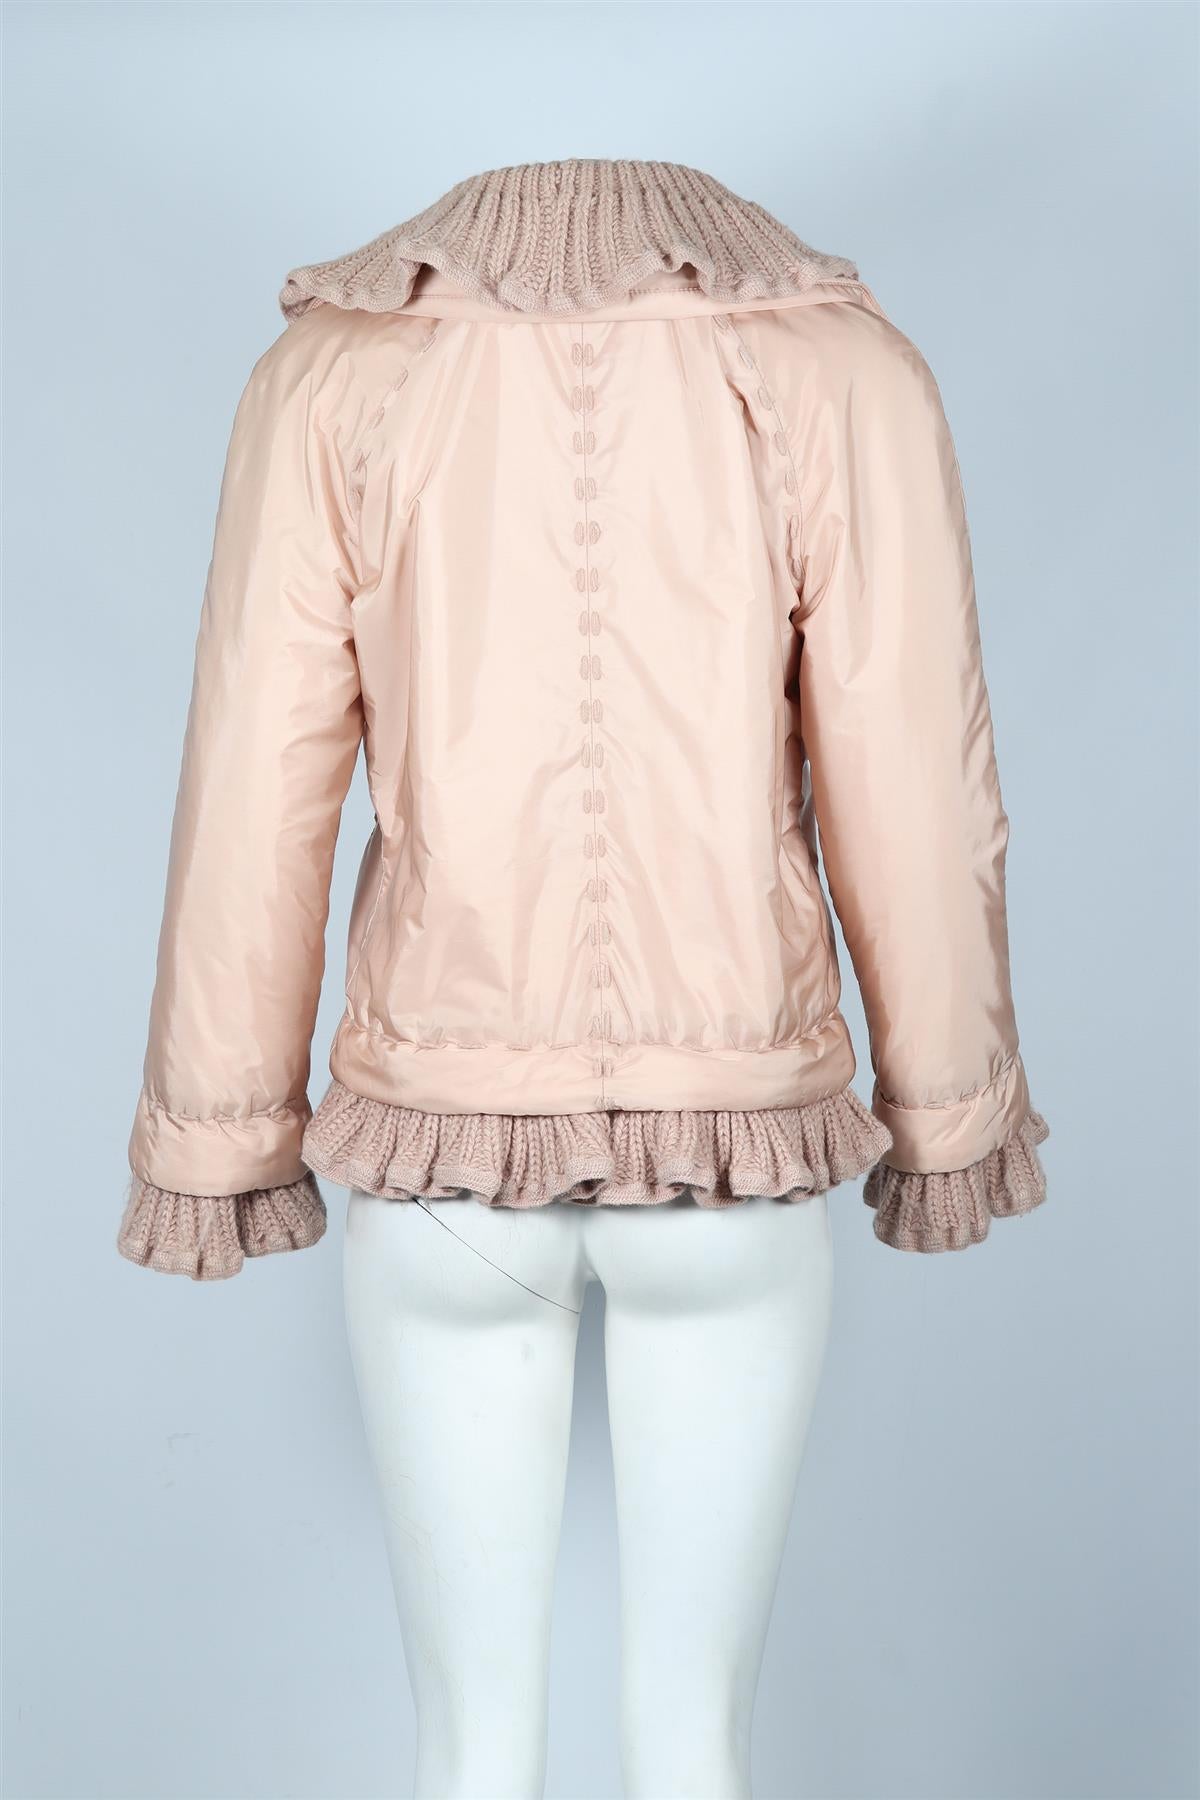 ERMANNO SCERVINO KNIT AND PADDED SHELL JACKET IT 42 UK 10